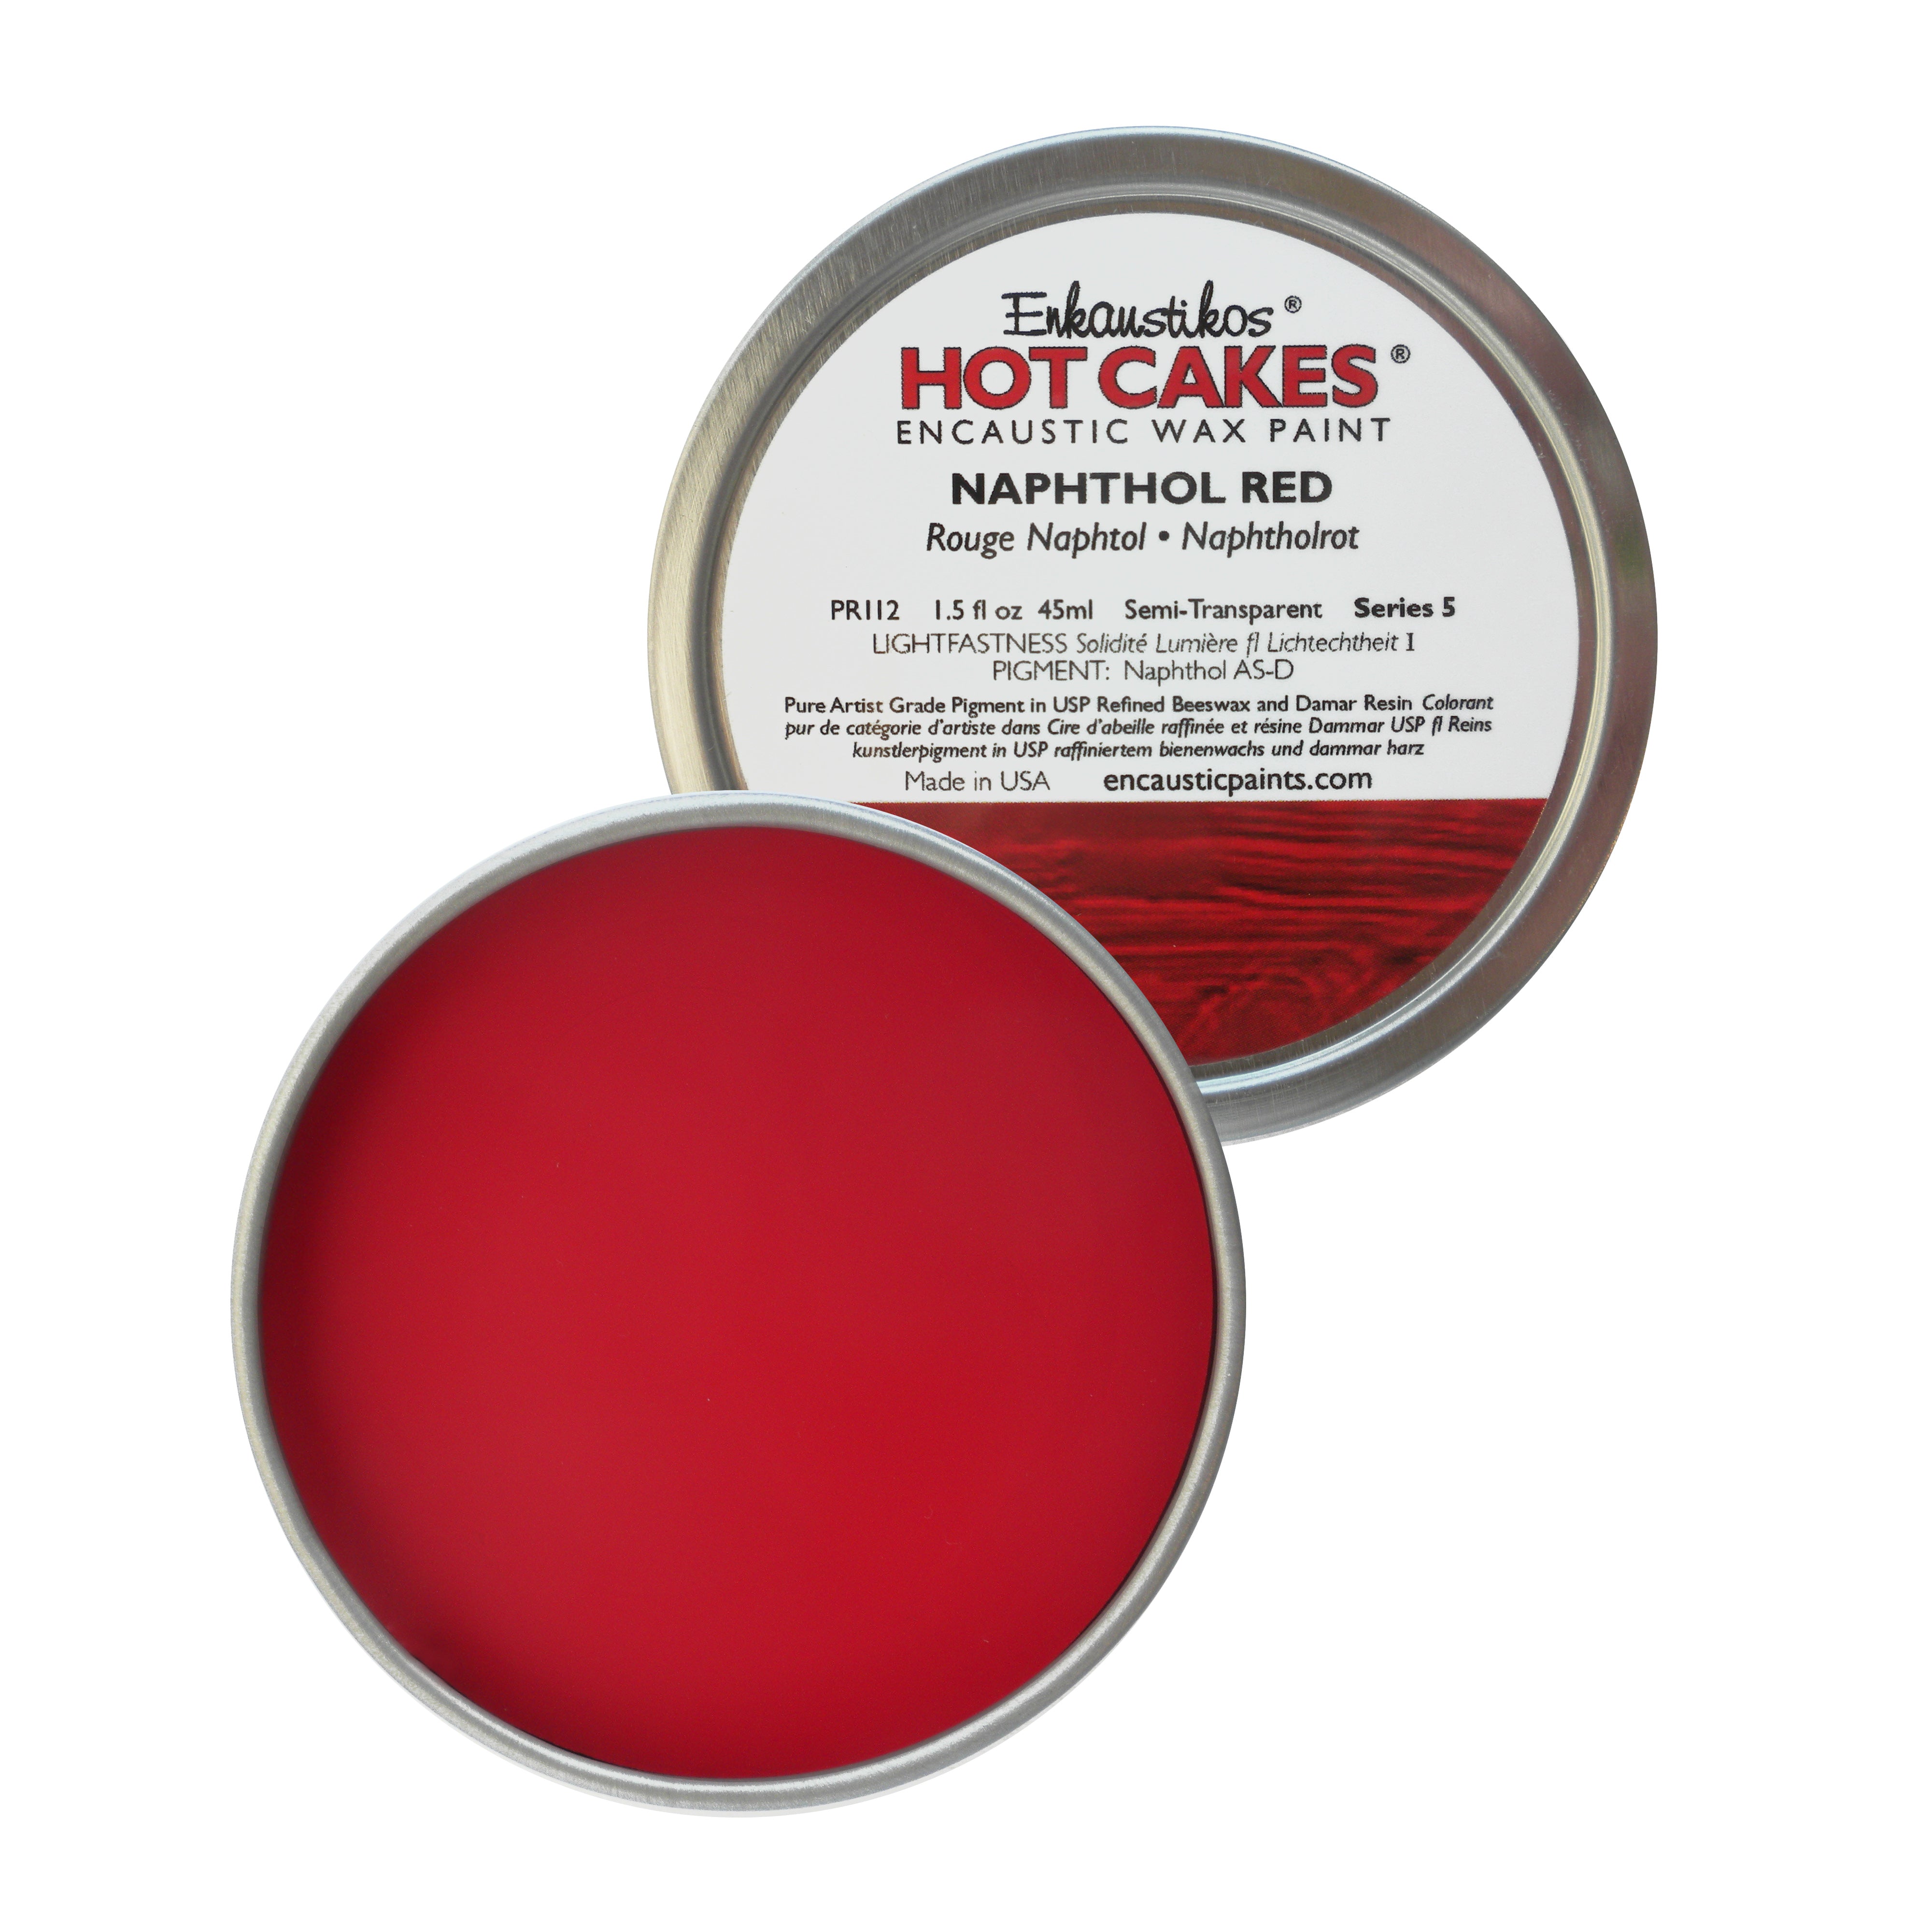 Naphthol Red Hot Cakes